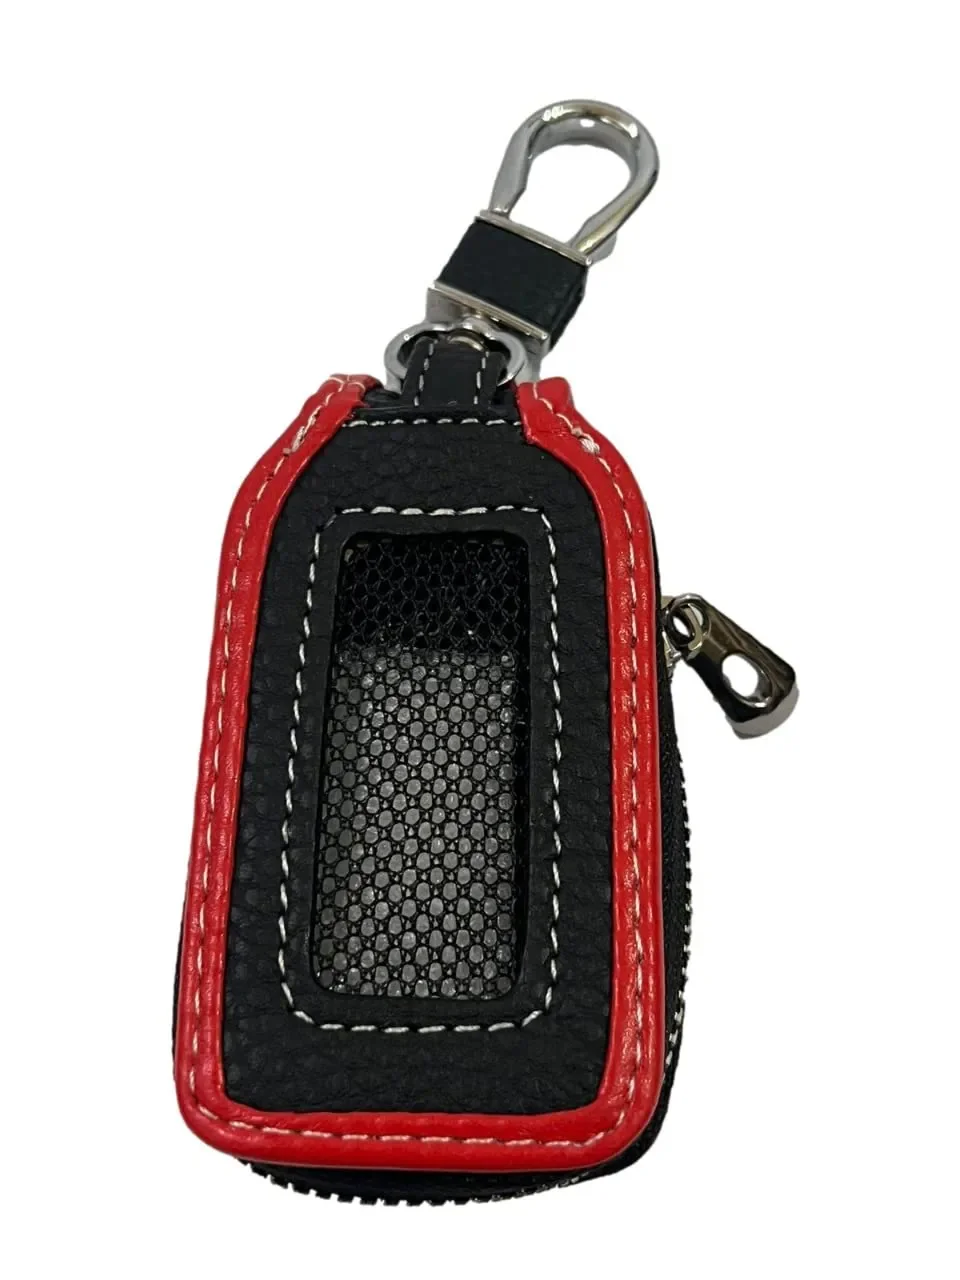 Car Key FOB Holder Protector case key Bag Wallet Cover Smart Key Chain with Metal Hook and zipper with Universal Fit (Black Red)